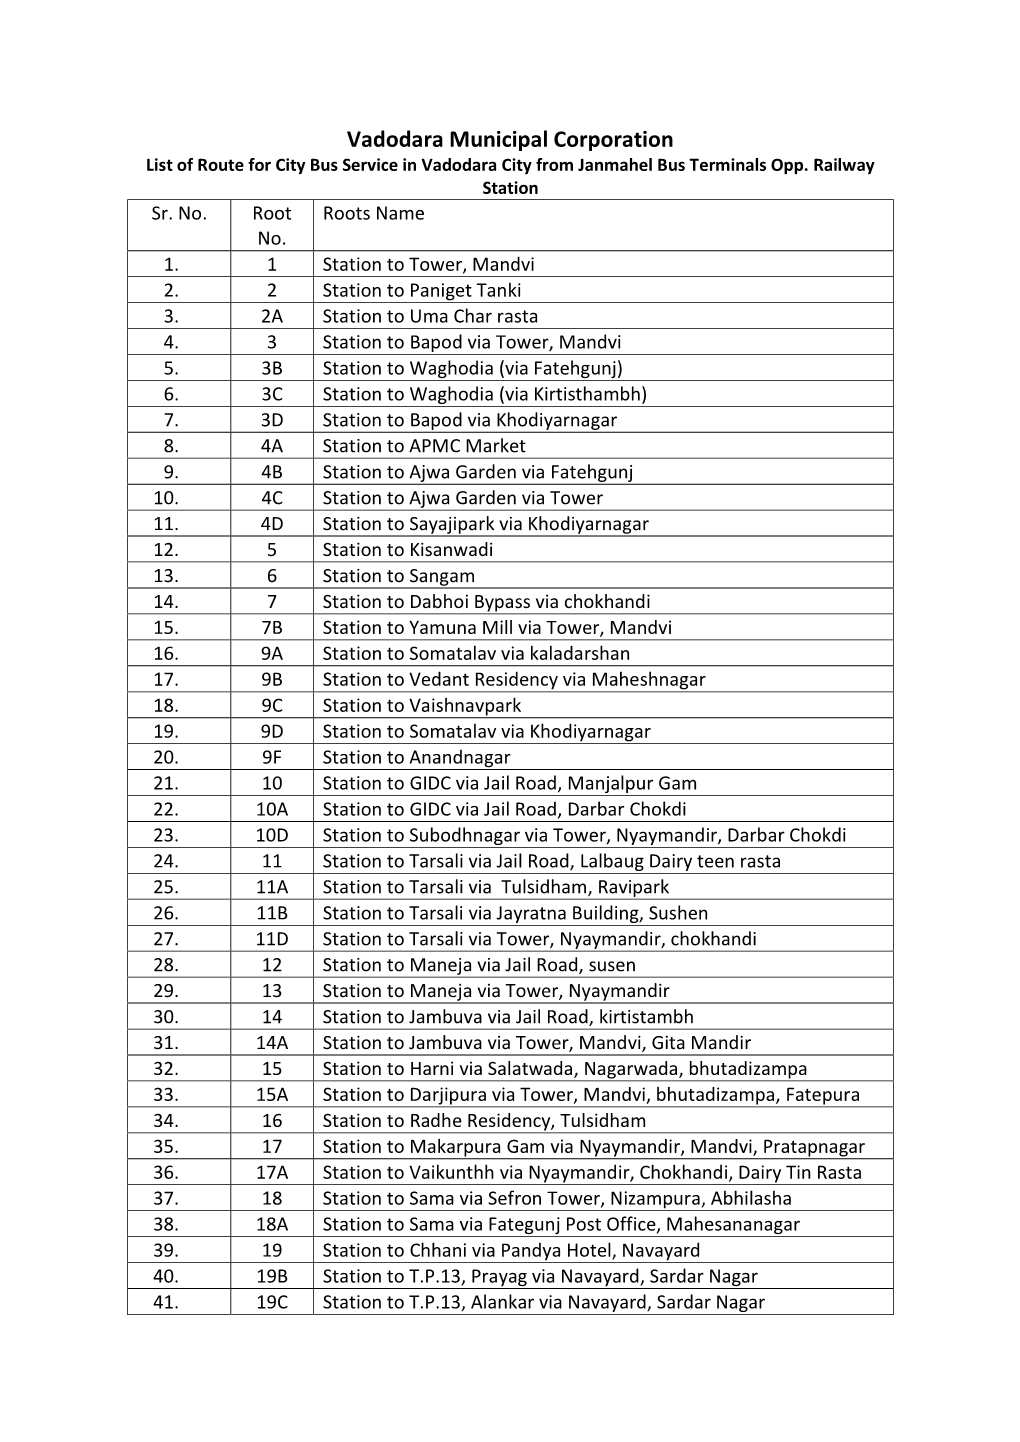 List of Route of City Bus Service in Vadodara City from Janmahal Bus Terminal